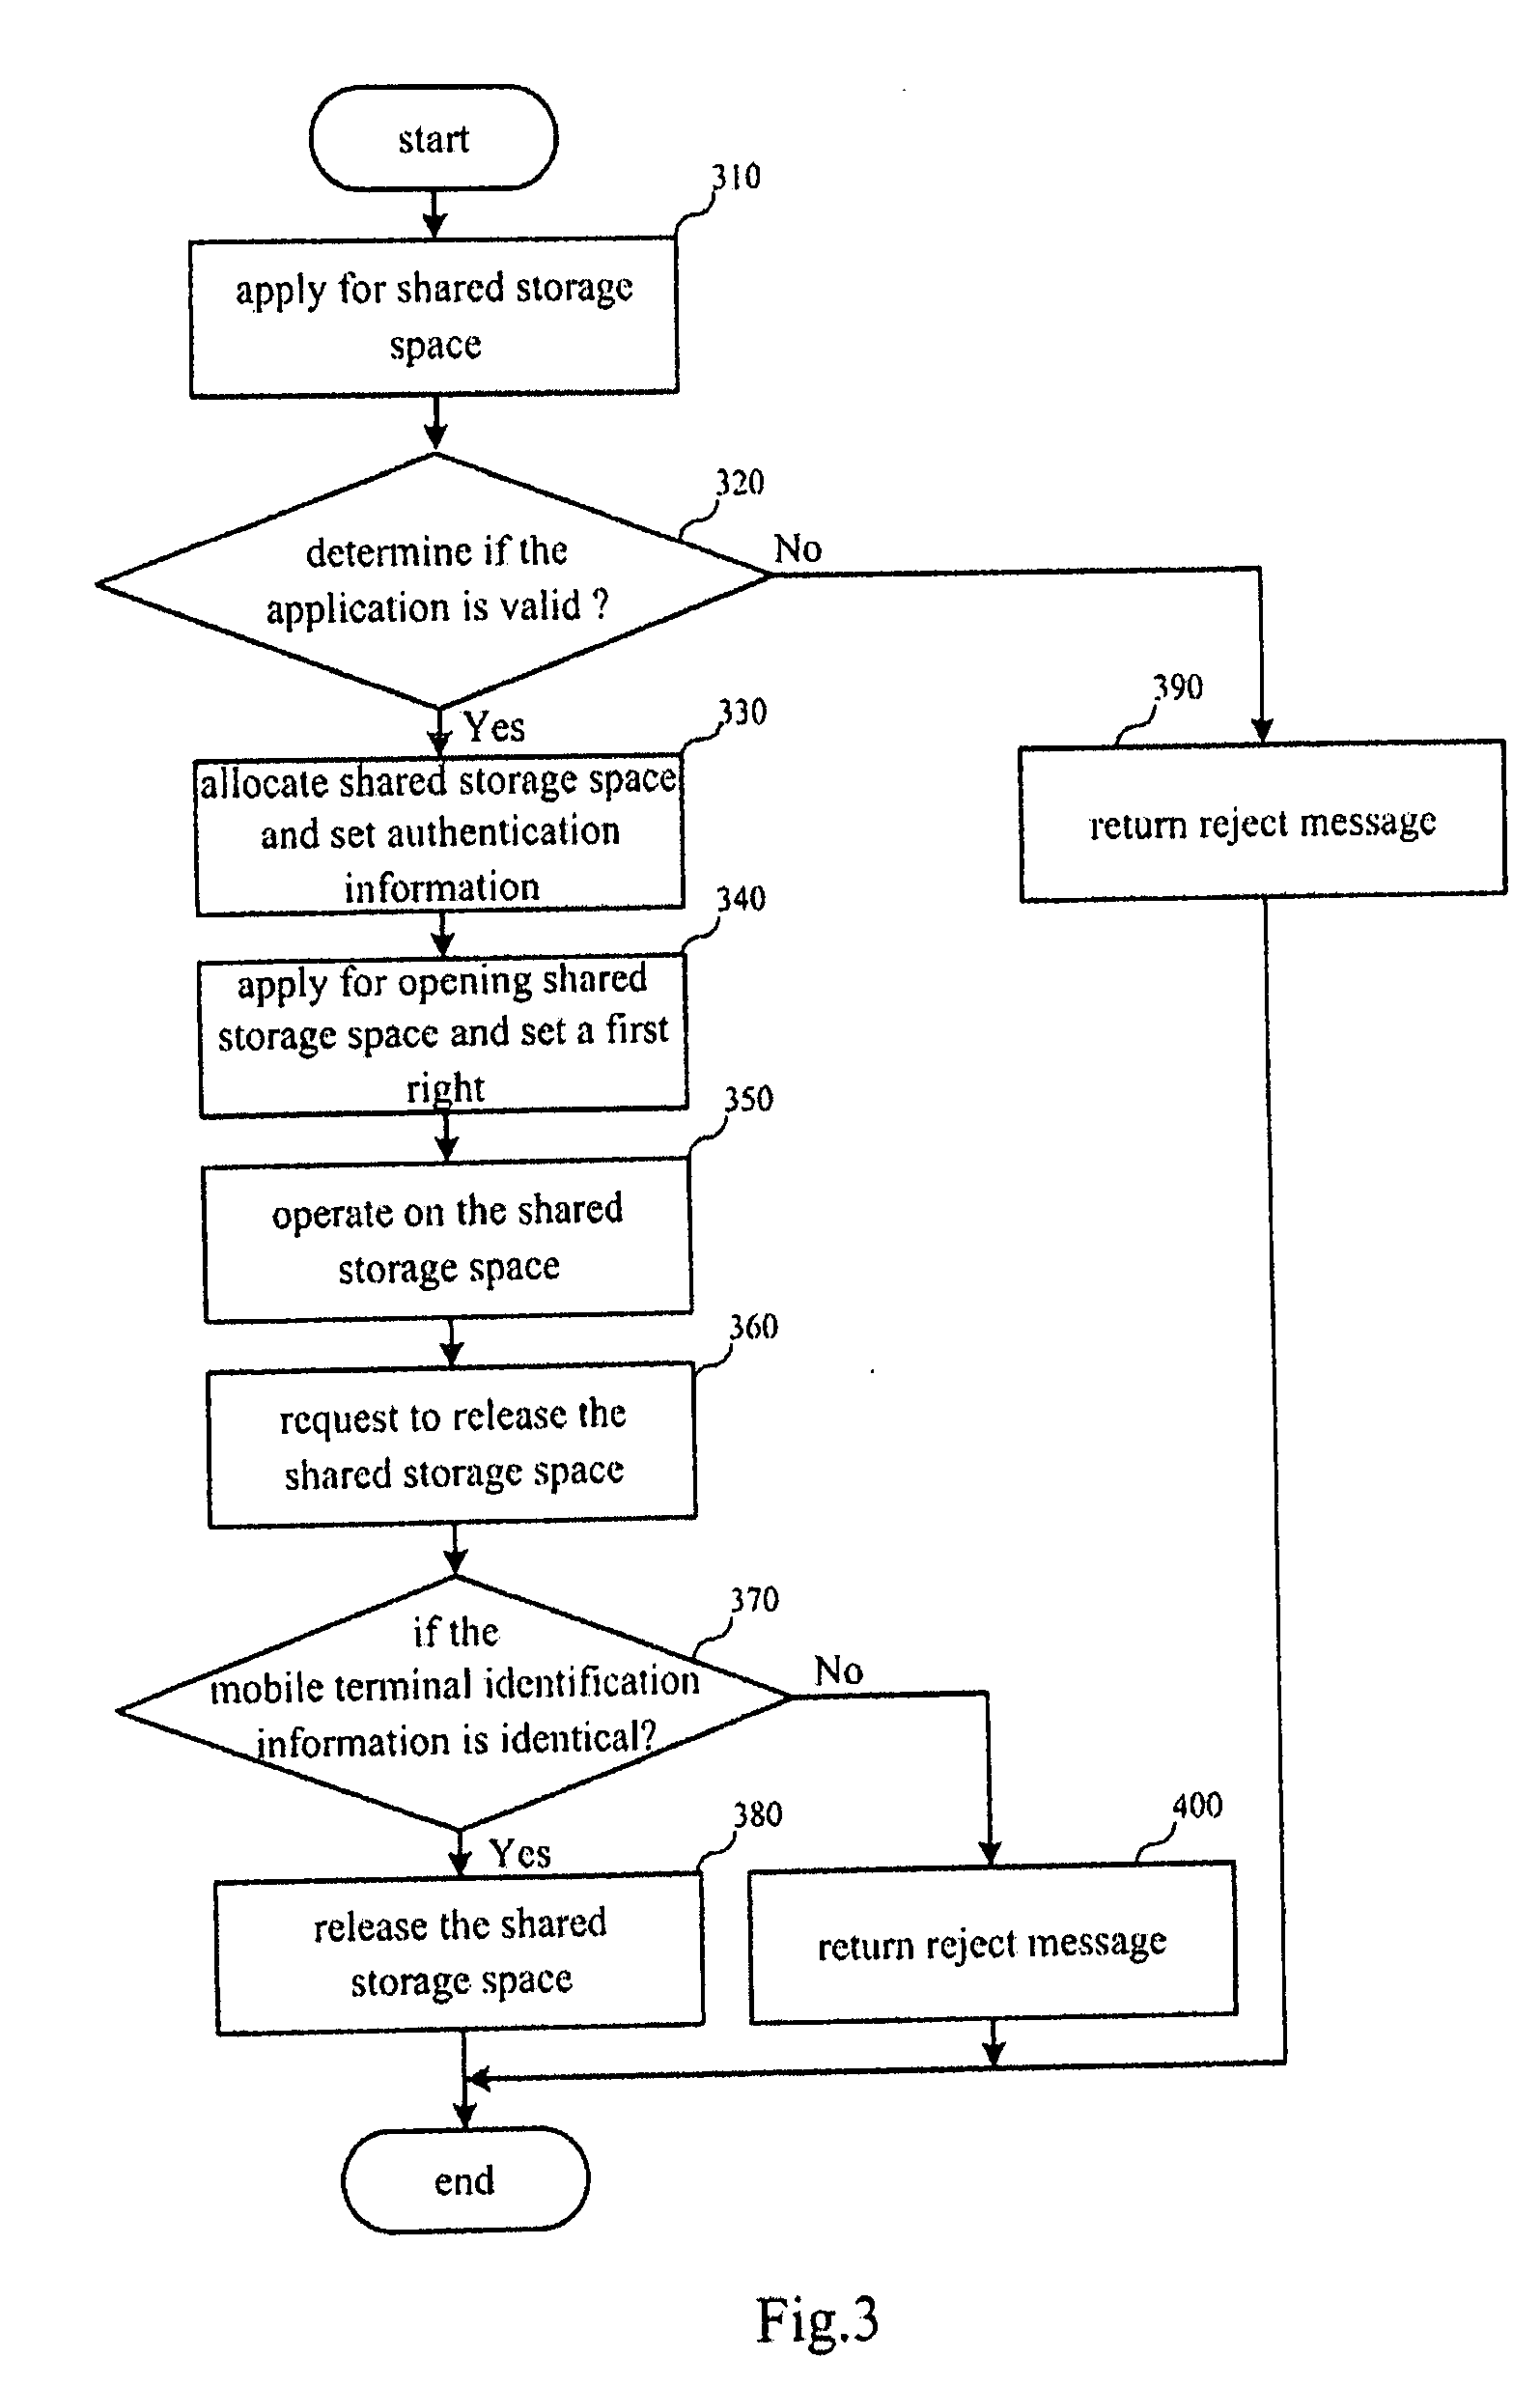 Method and System for Mobile Terminals to Share Storage Space